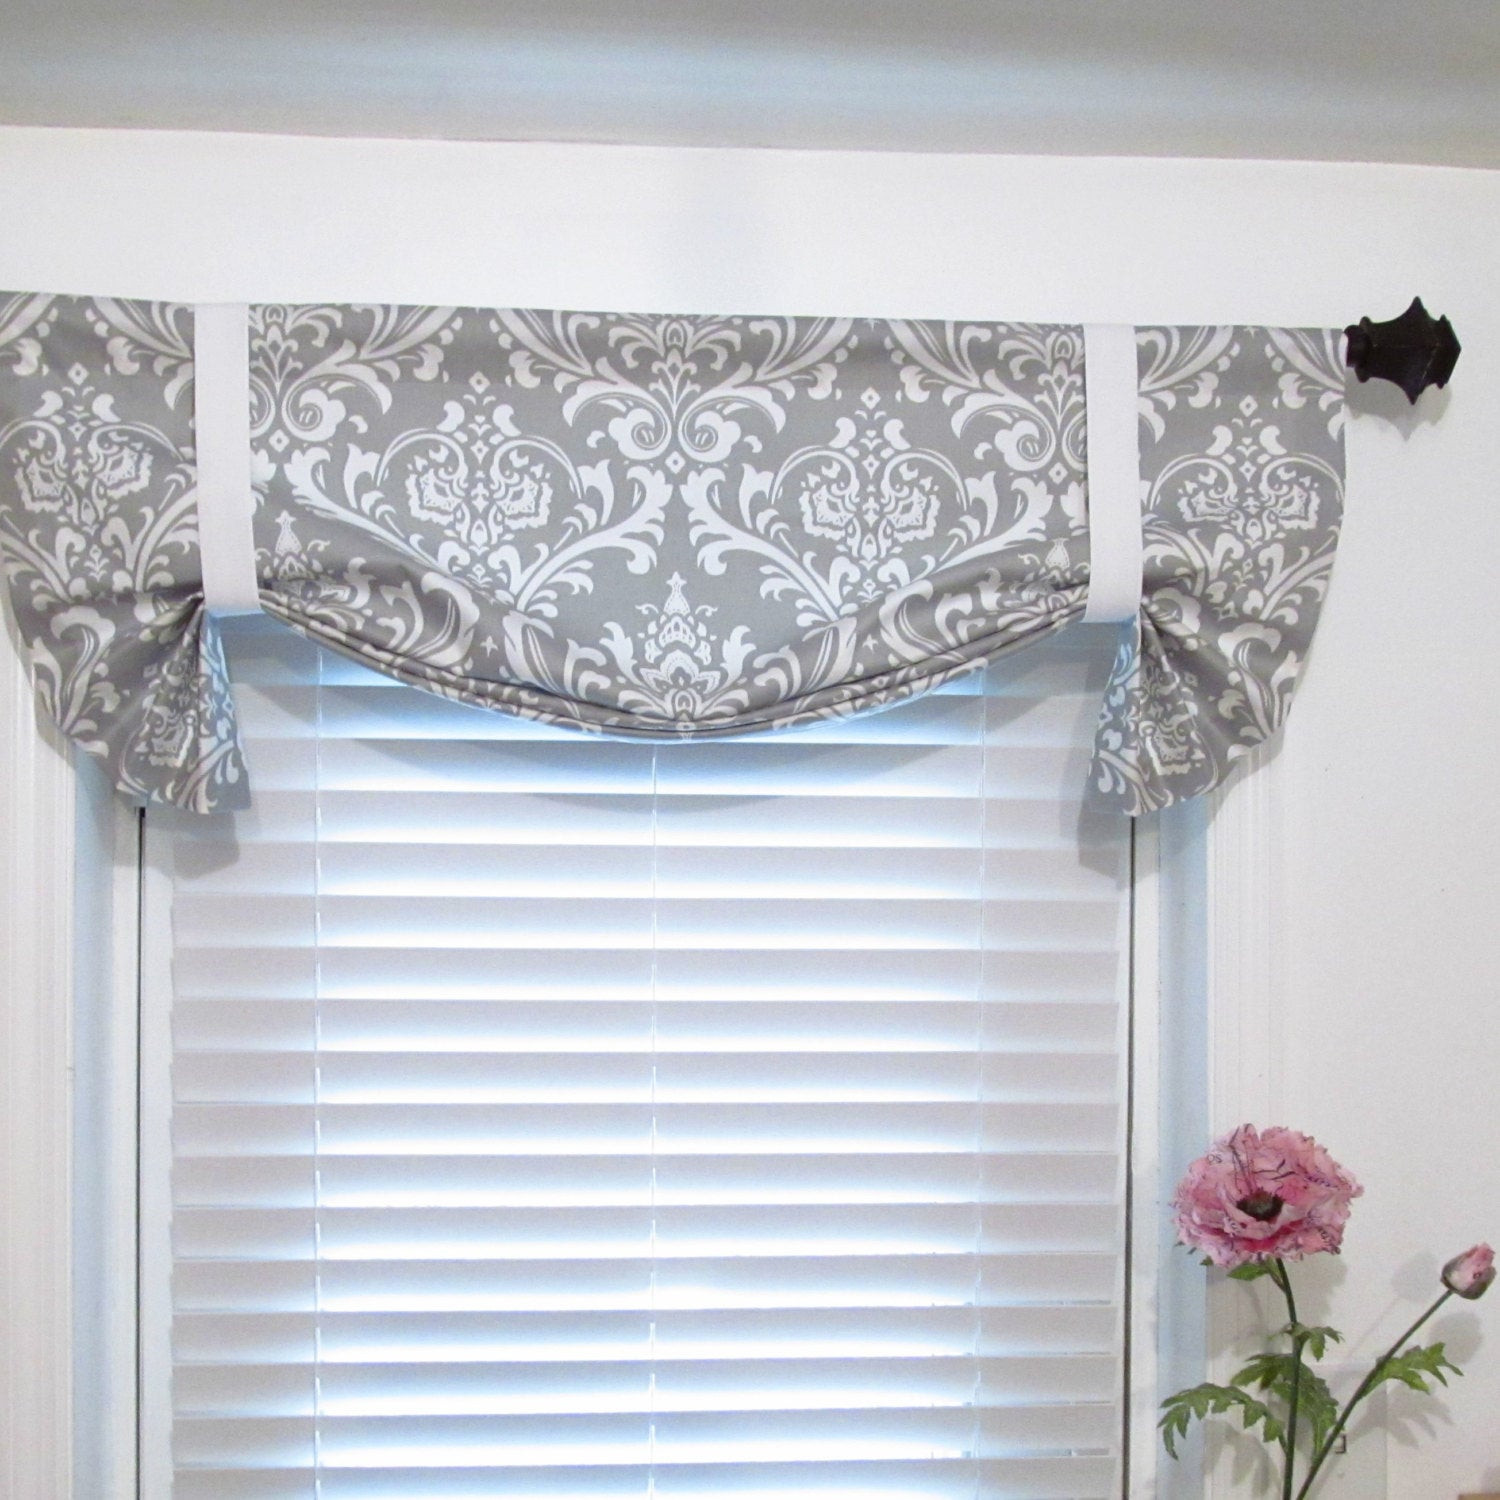 Grey Kitchen Curtains
 Tie Up Curtain Valance Gray White Damask by supplierofdreams